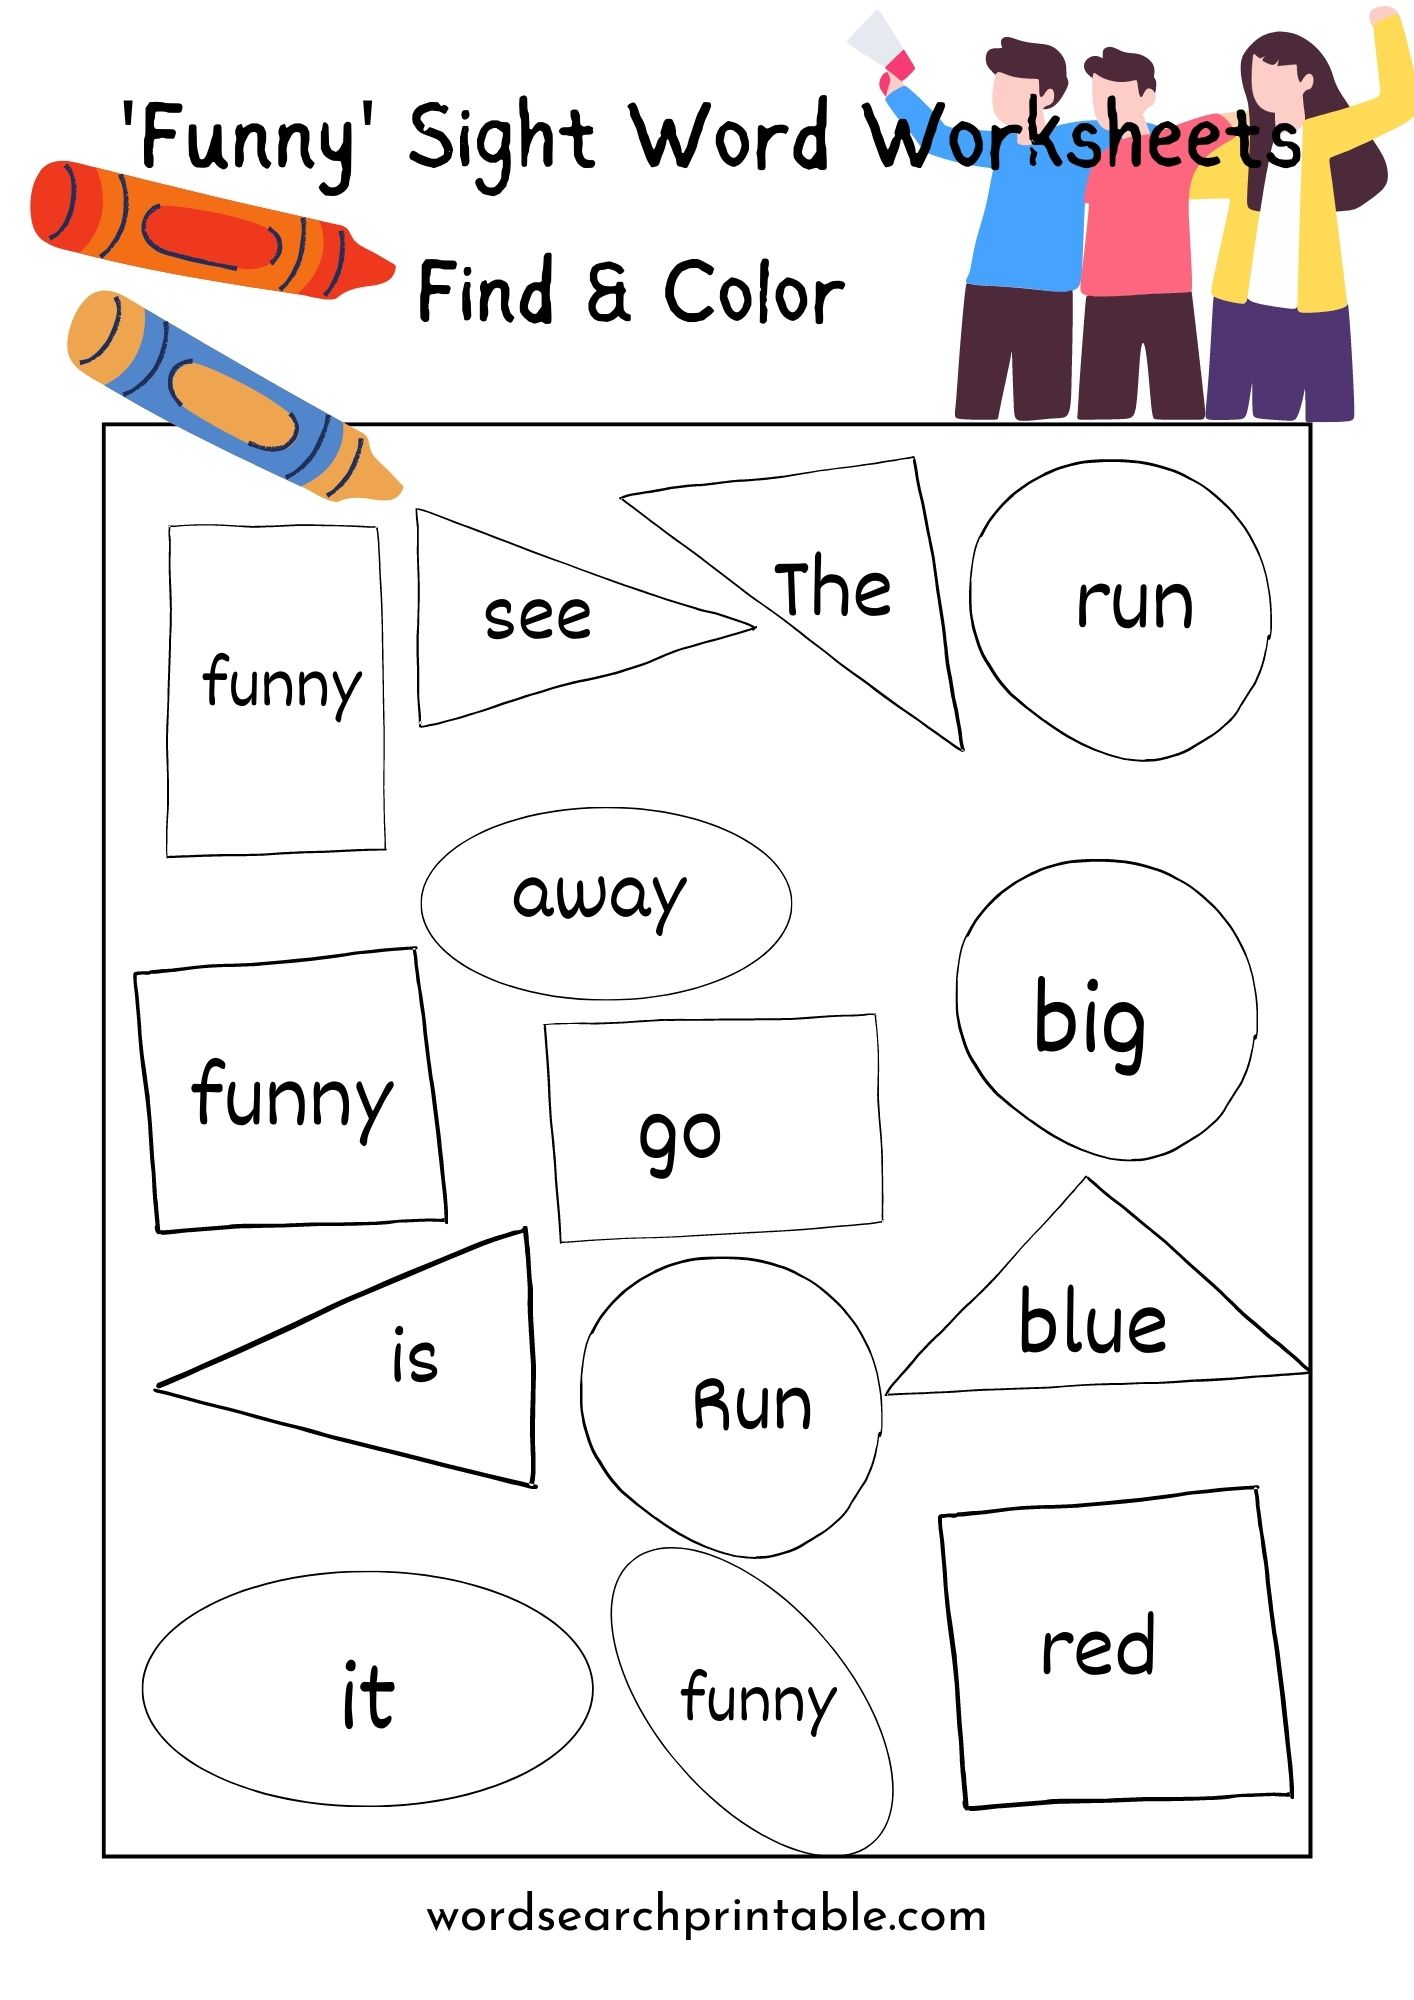 Find ‘Funny’ and Color the shape - sight word funny worksheet